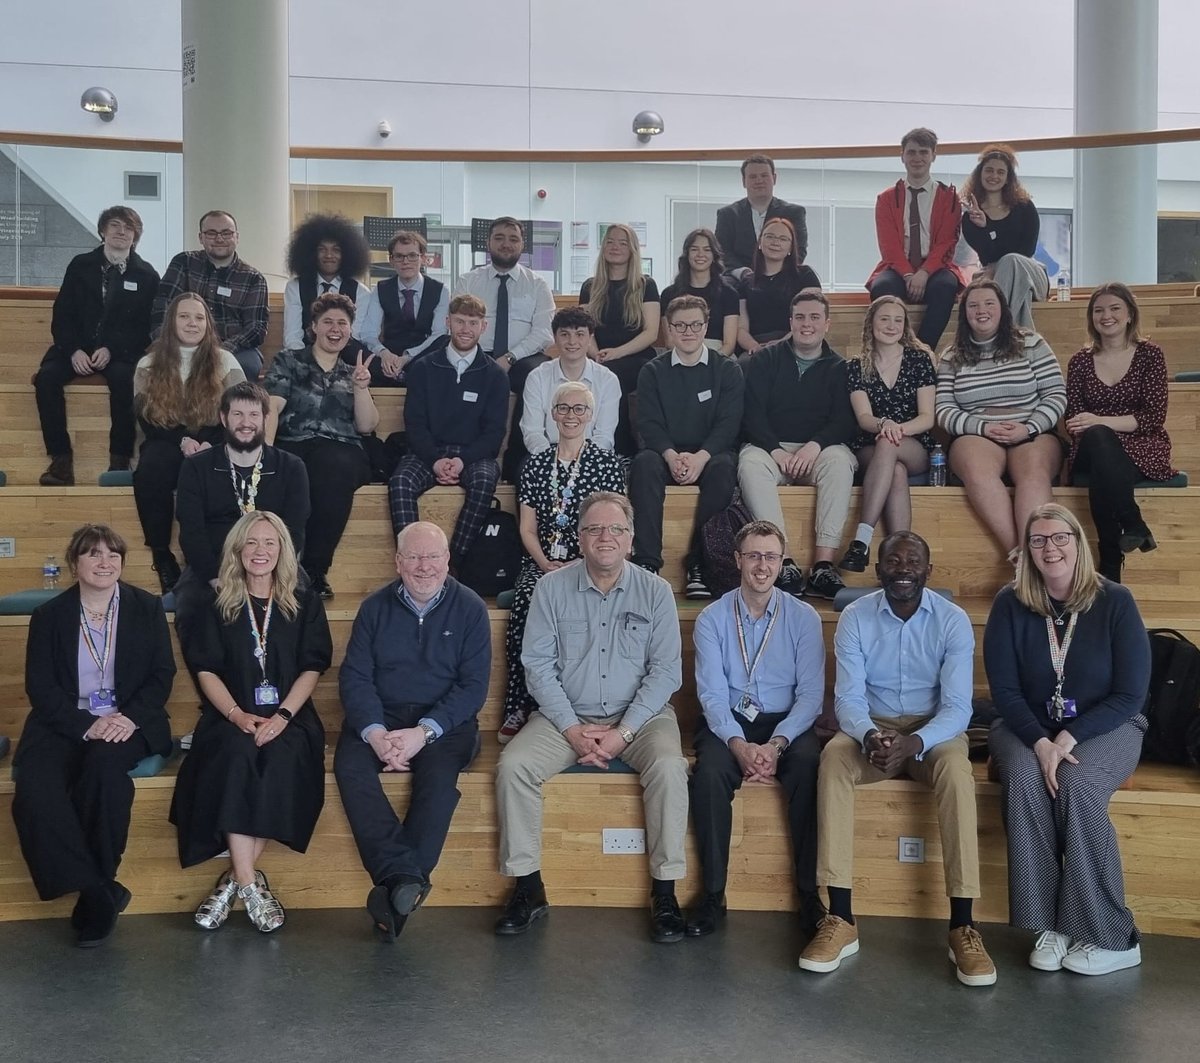 Delighted RGU is recognised as 1 of the top universities to study Forensic Science in the UK according to the New Scientist Career Guide. Best Universities for Forensic Science in the UK: A New Scientists Career Guide’ tinyurl.com/3mprfpav Below is the Class of 2024 @RGUPALS